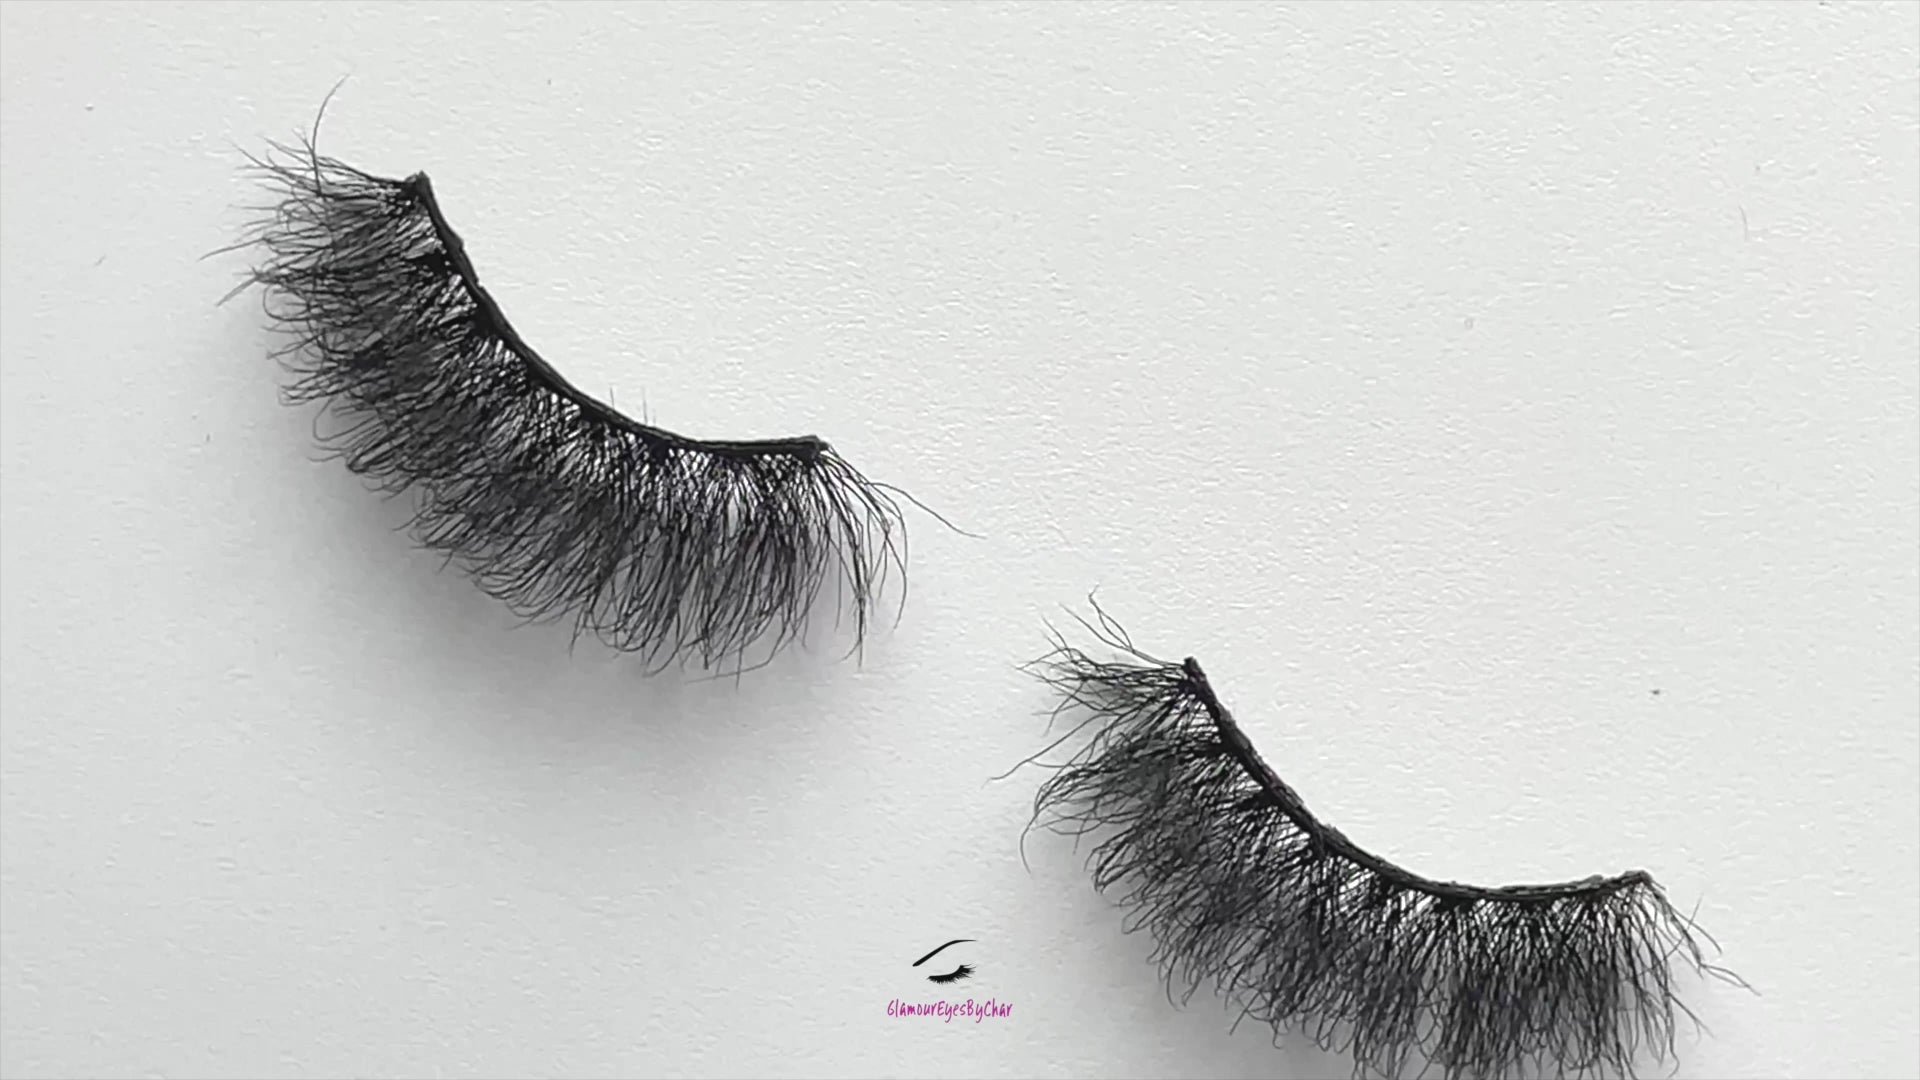 These 3D premium faux mink lashes are 20mm in length. They are soft, lightweight and very comfortable to wear on the lids. The flexible cotton lash band, makes the application process a breeze. Oh Baby lashes are suitable for everyday use, with a soft natural look. You can wear this reusable style up to 25 times if handled with care.